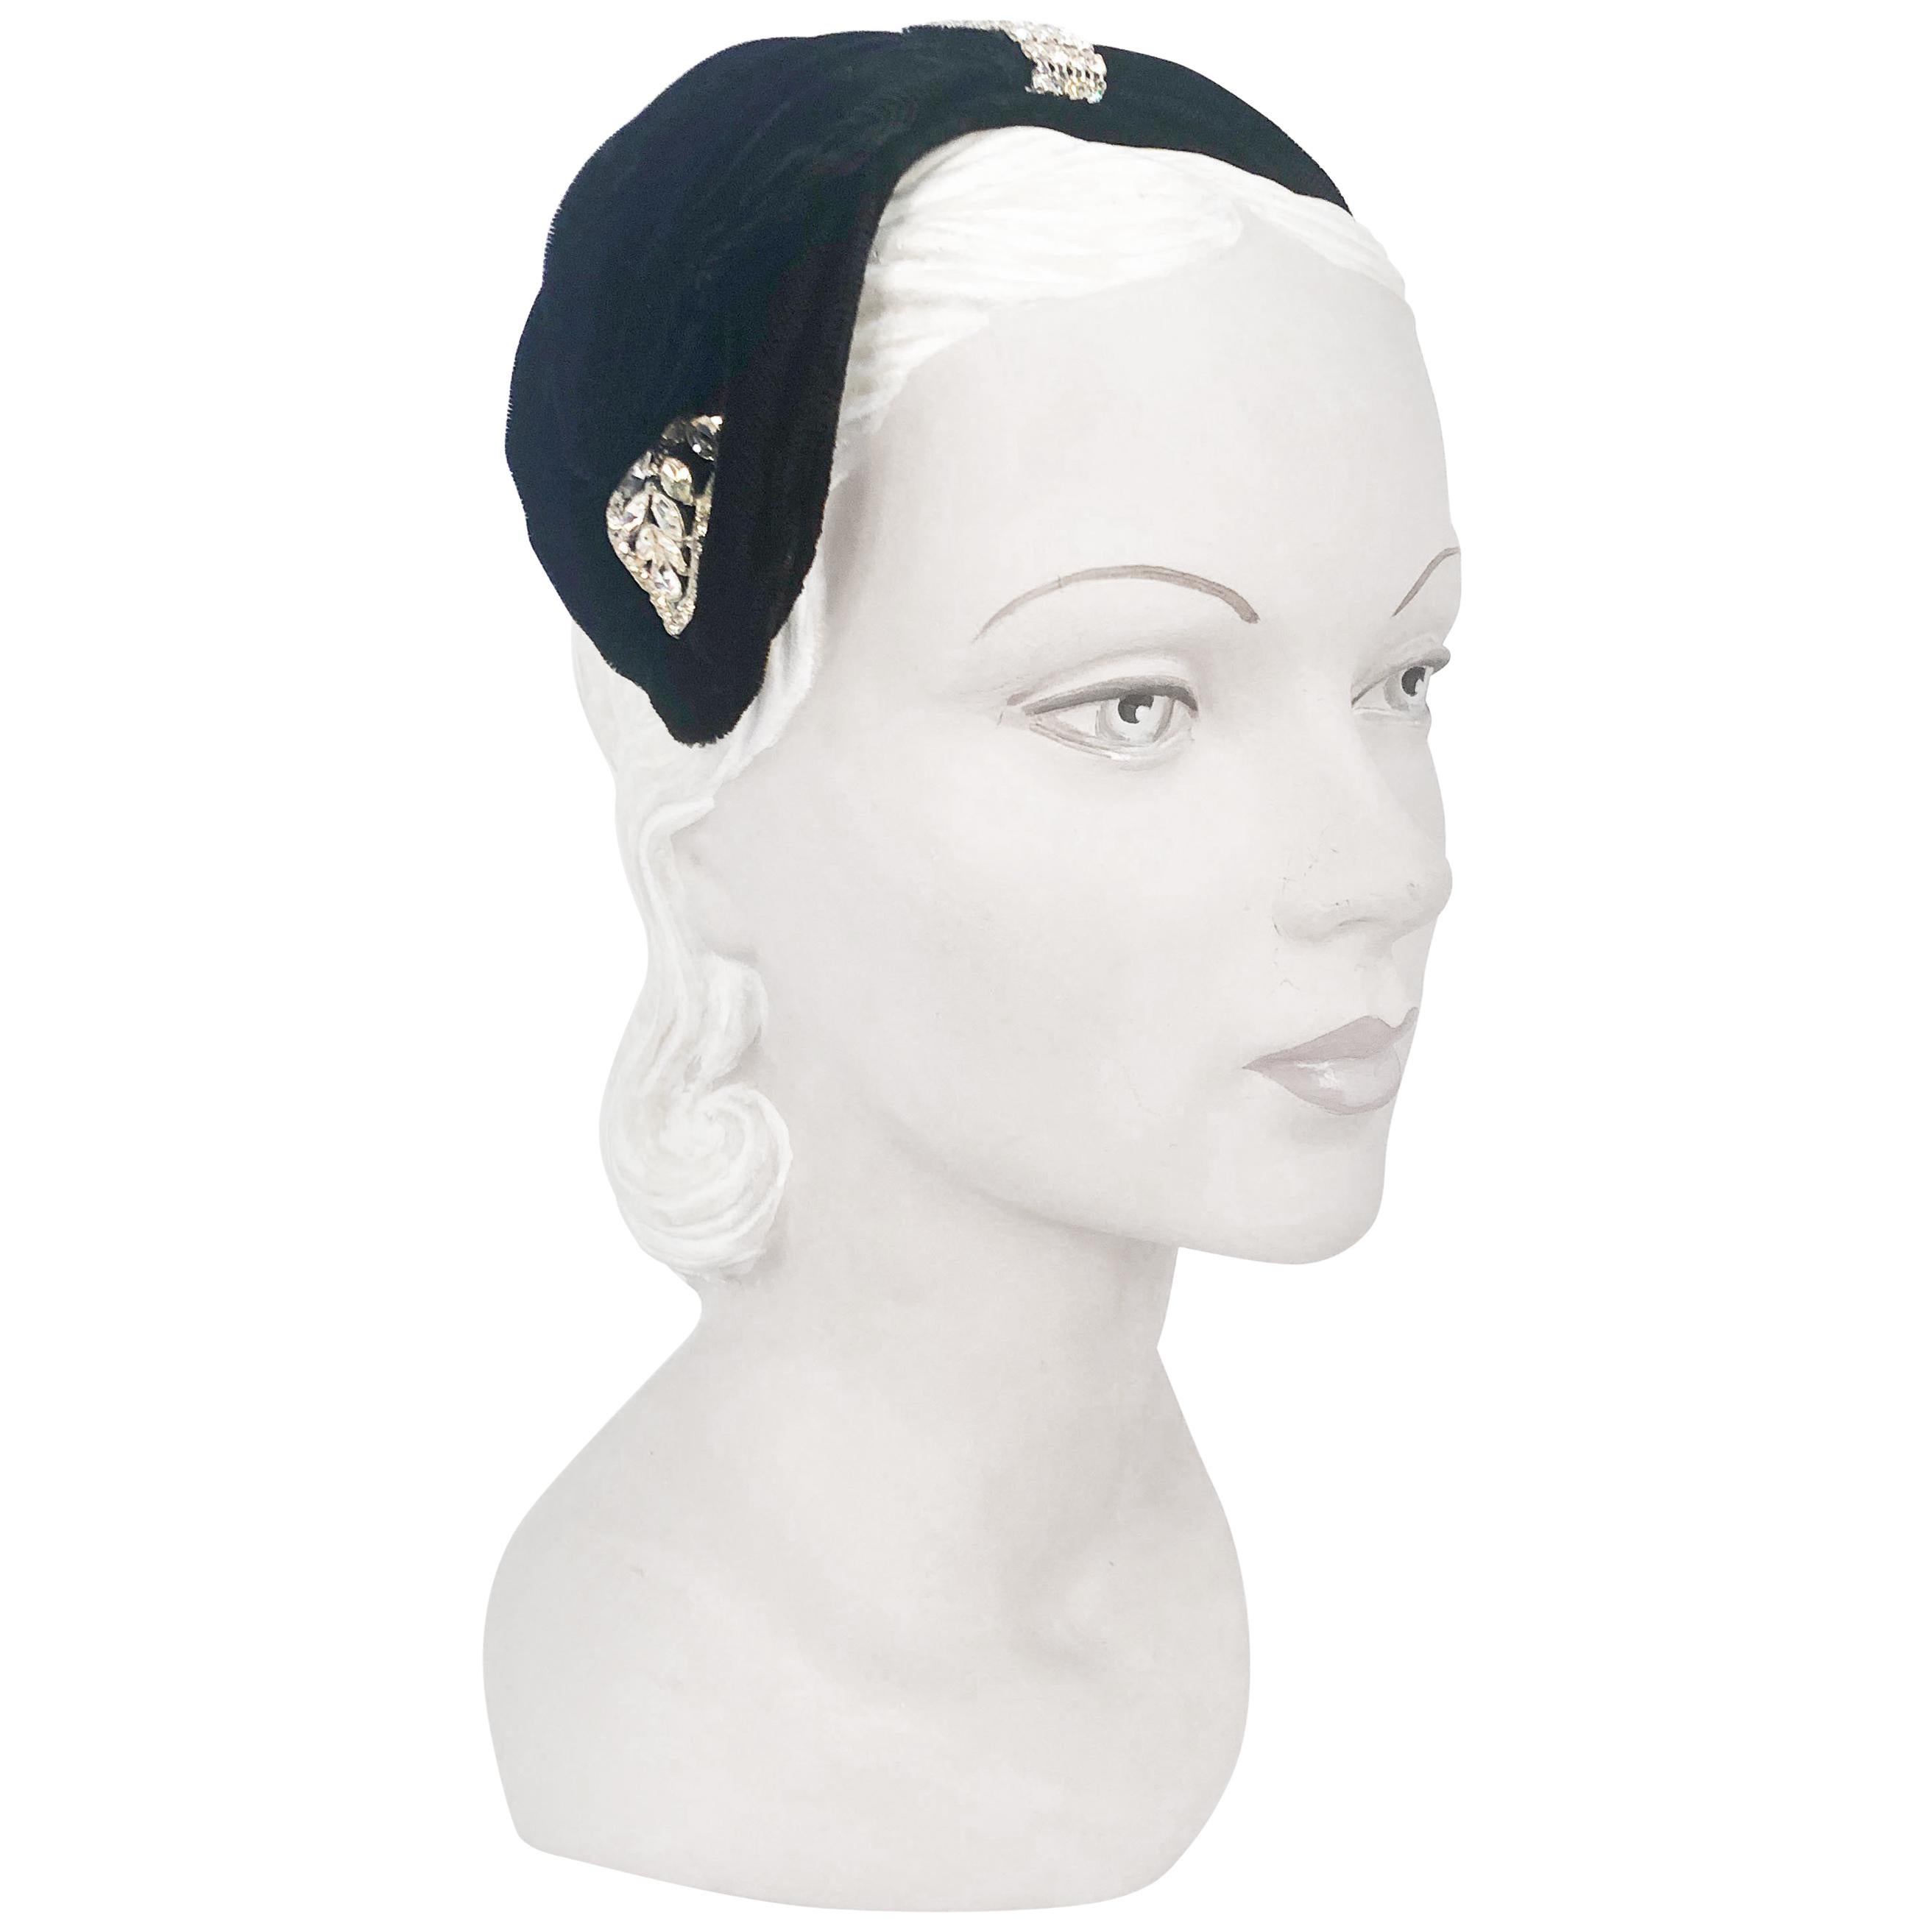 1950's Black Velvet Cocktail Hat with Rhinestone Accents